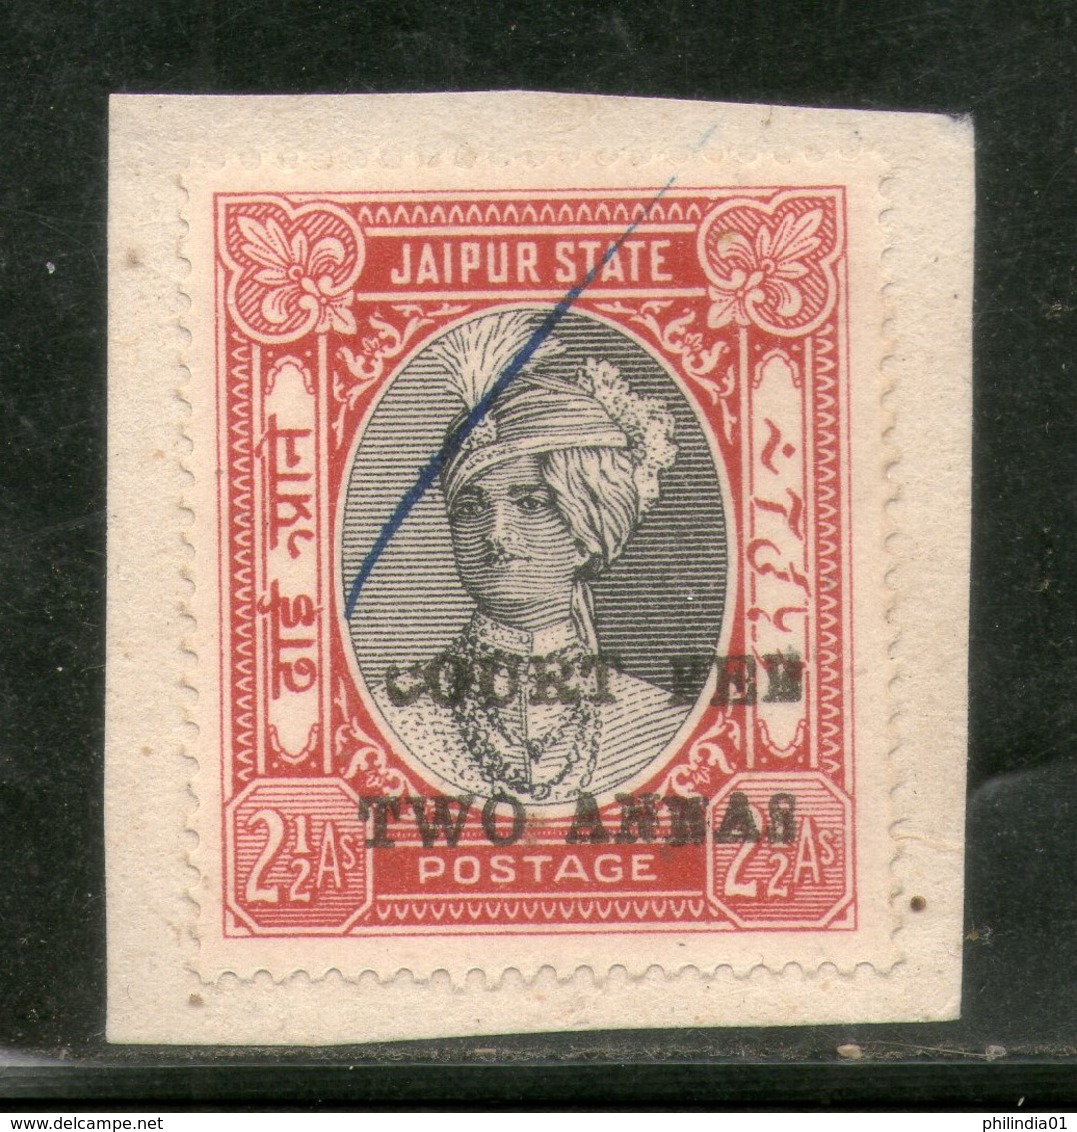 India Fiscal Jaipur State 2 As O/P On 2½ As King Court Fee Type 15 KM 154 Revenue # 231A - Jaipur